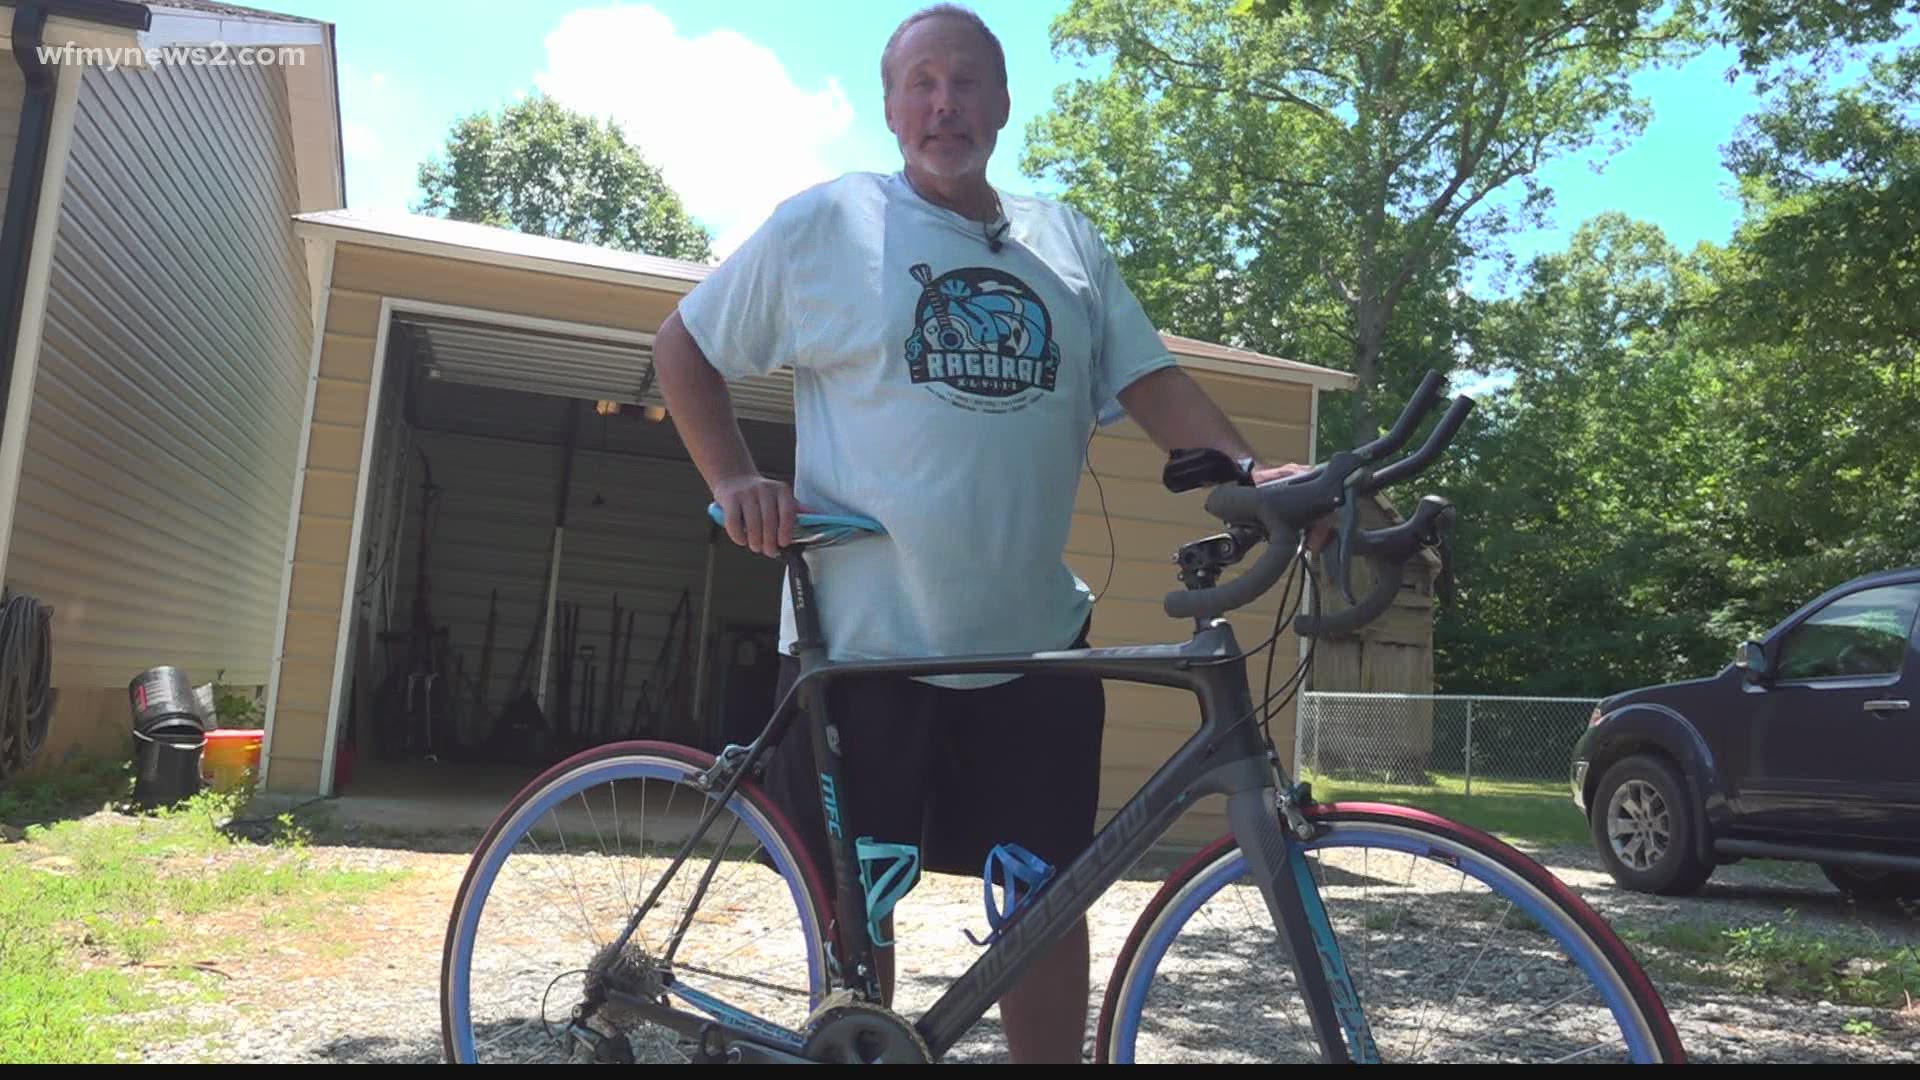 Richard Capps’ gears started turning when he learned a student was diagnosed with cancer.